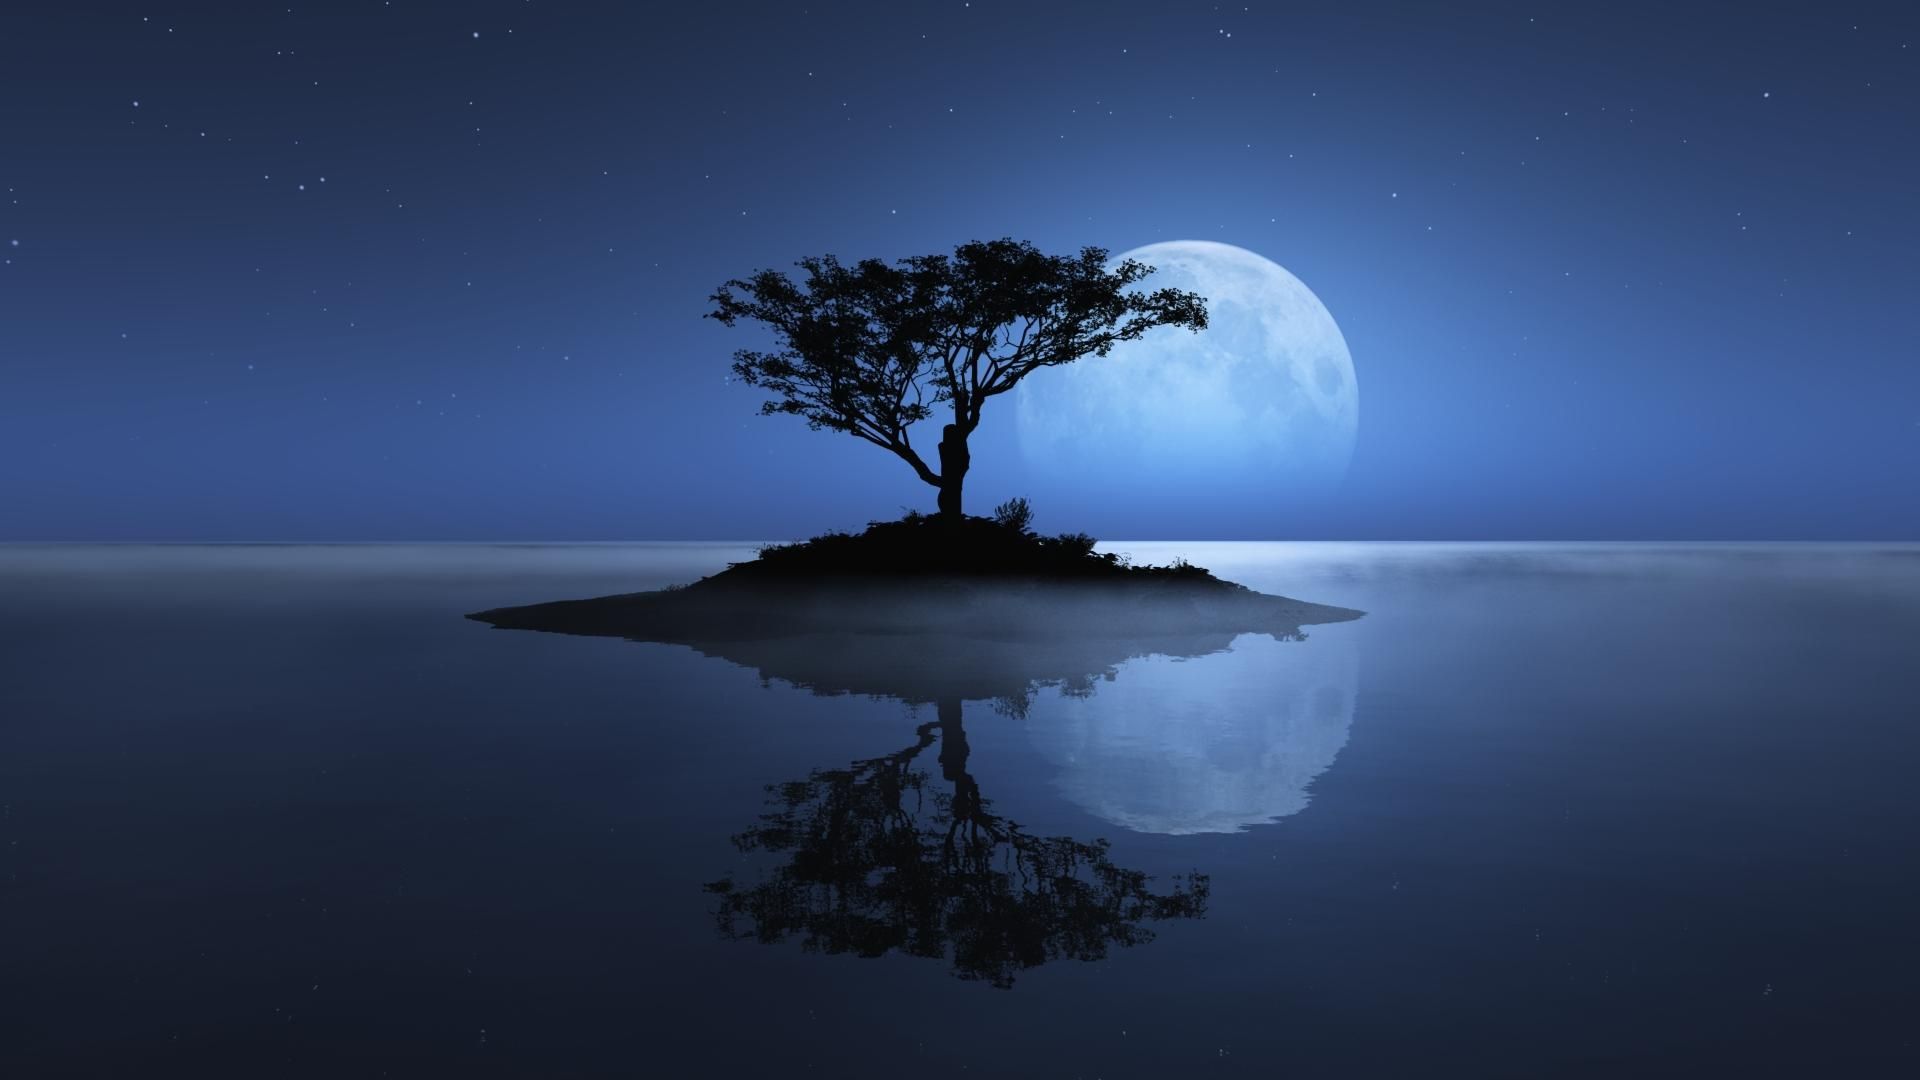 Night Nature Wallpapers   Top Free Night Nature Backgrounds